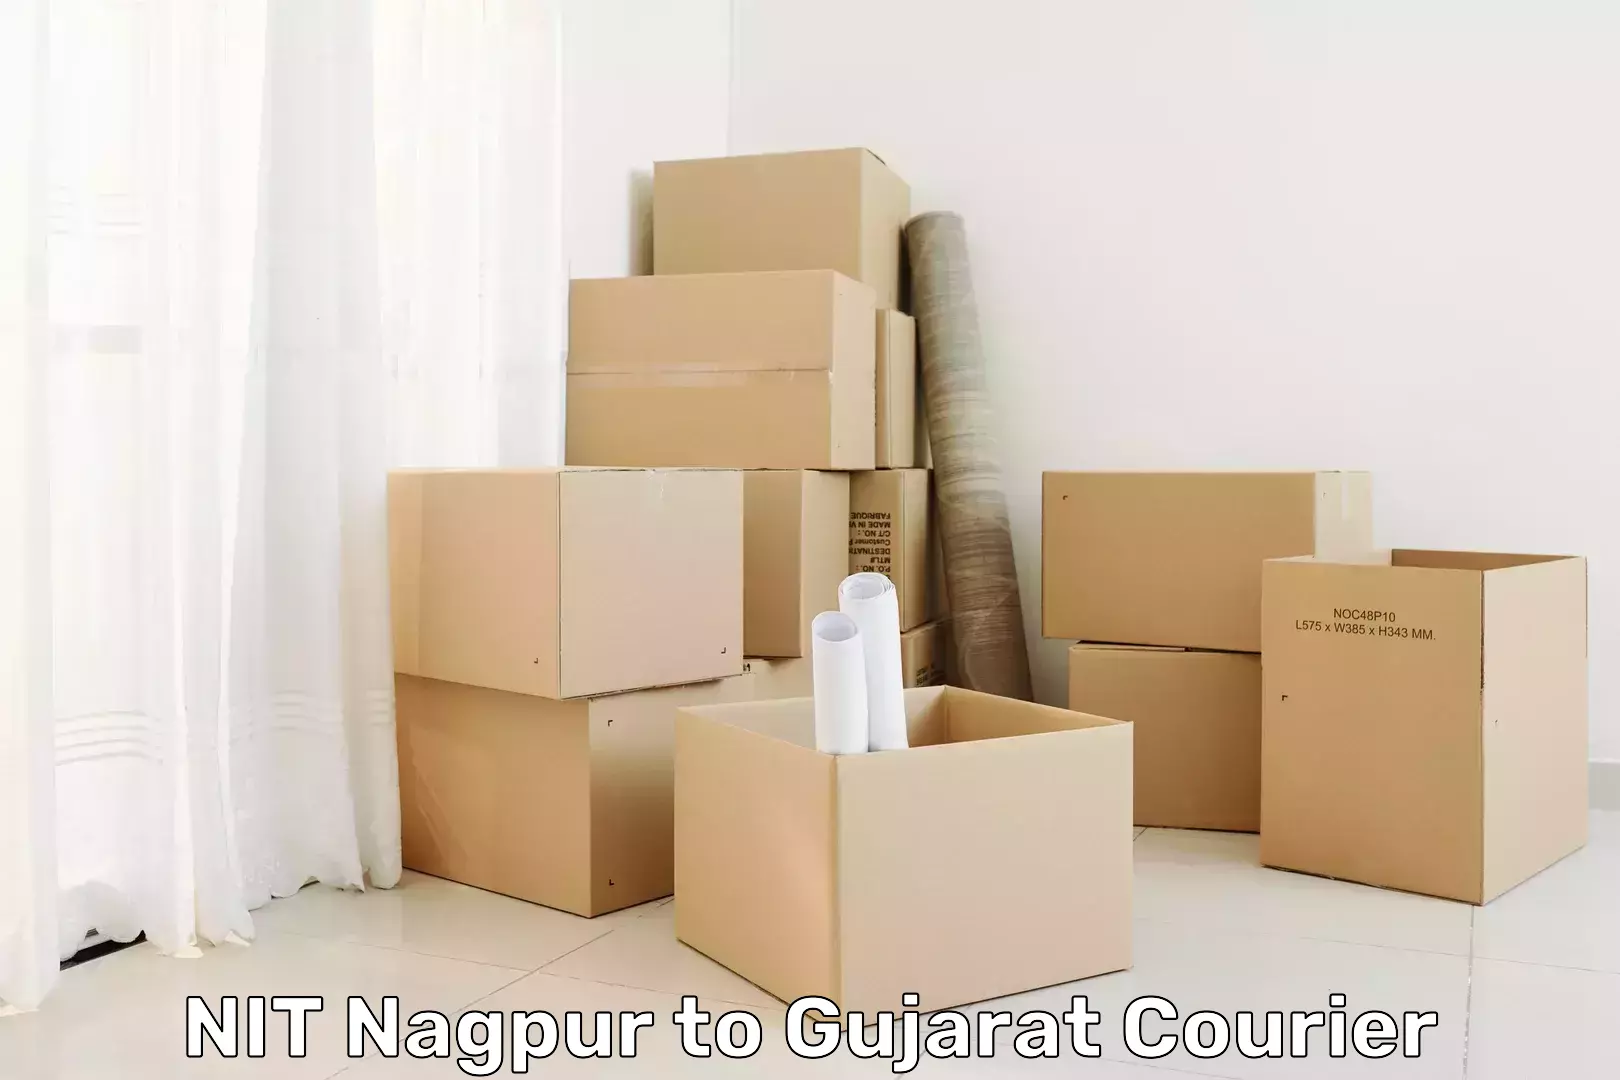 Package delivery network NIT Nagpur to Gujarat